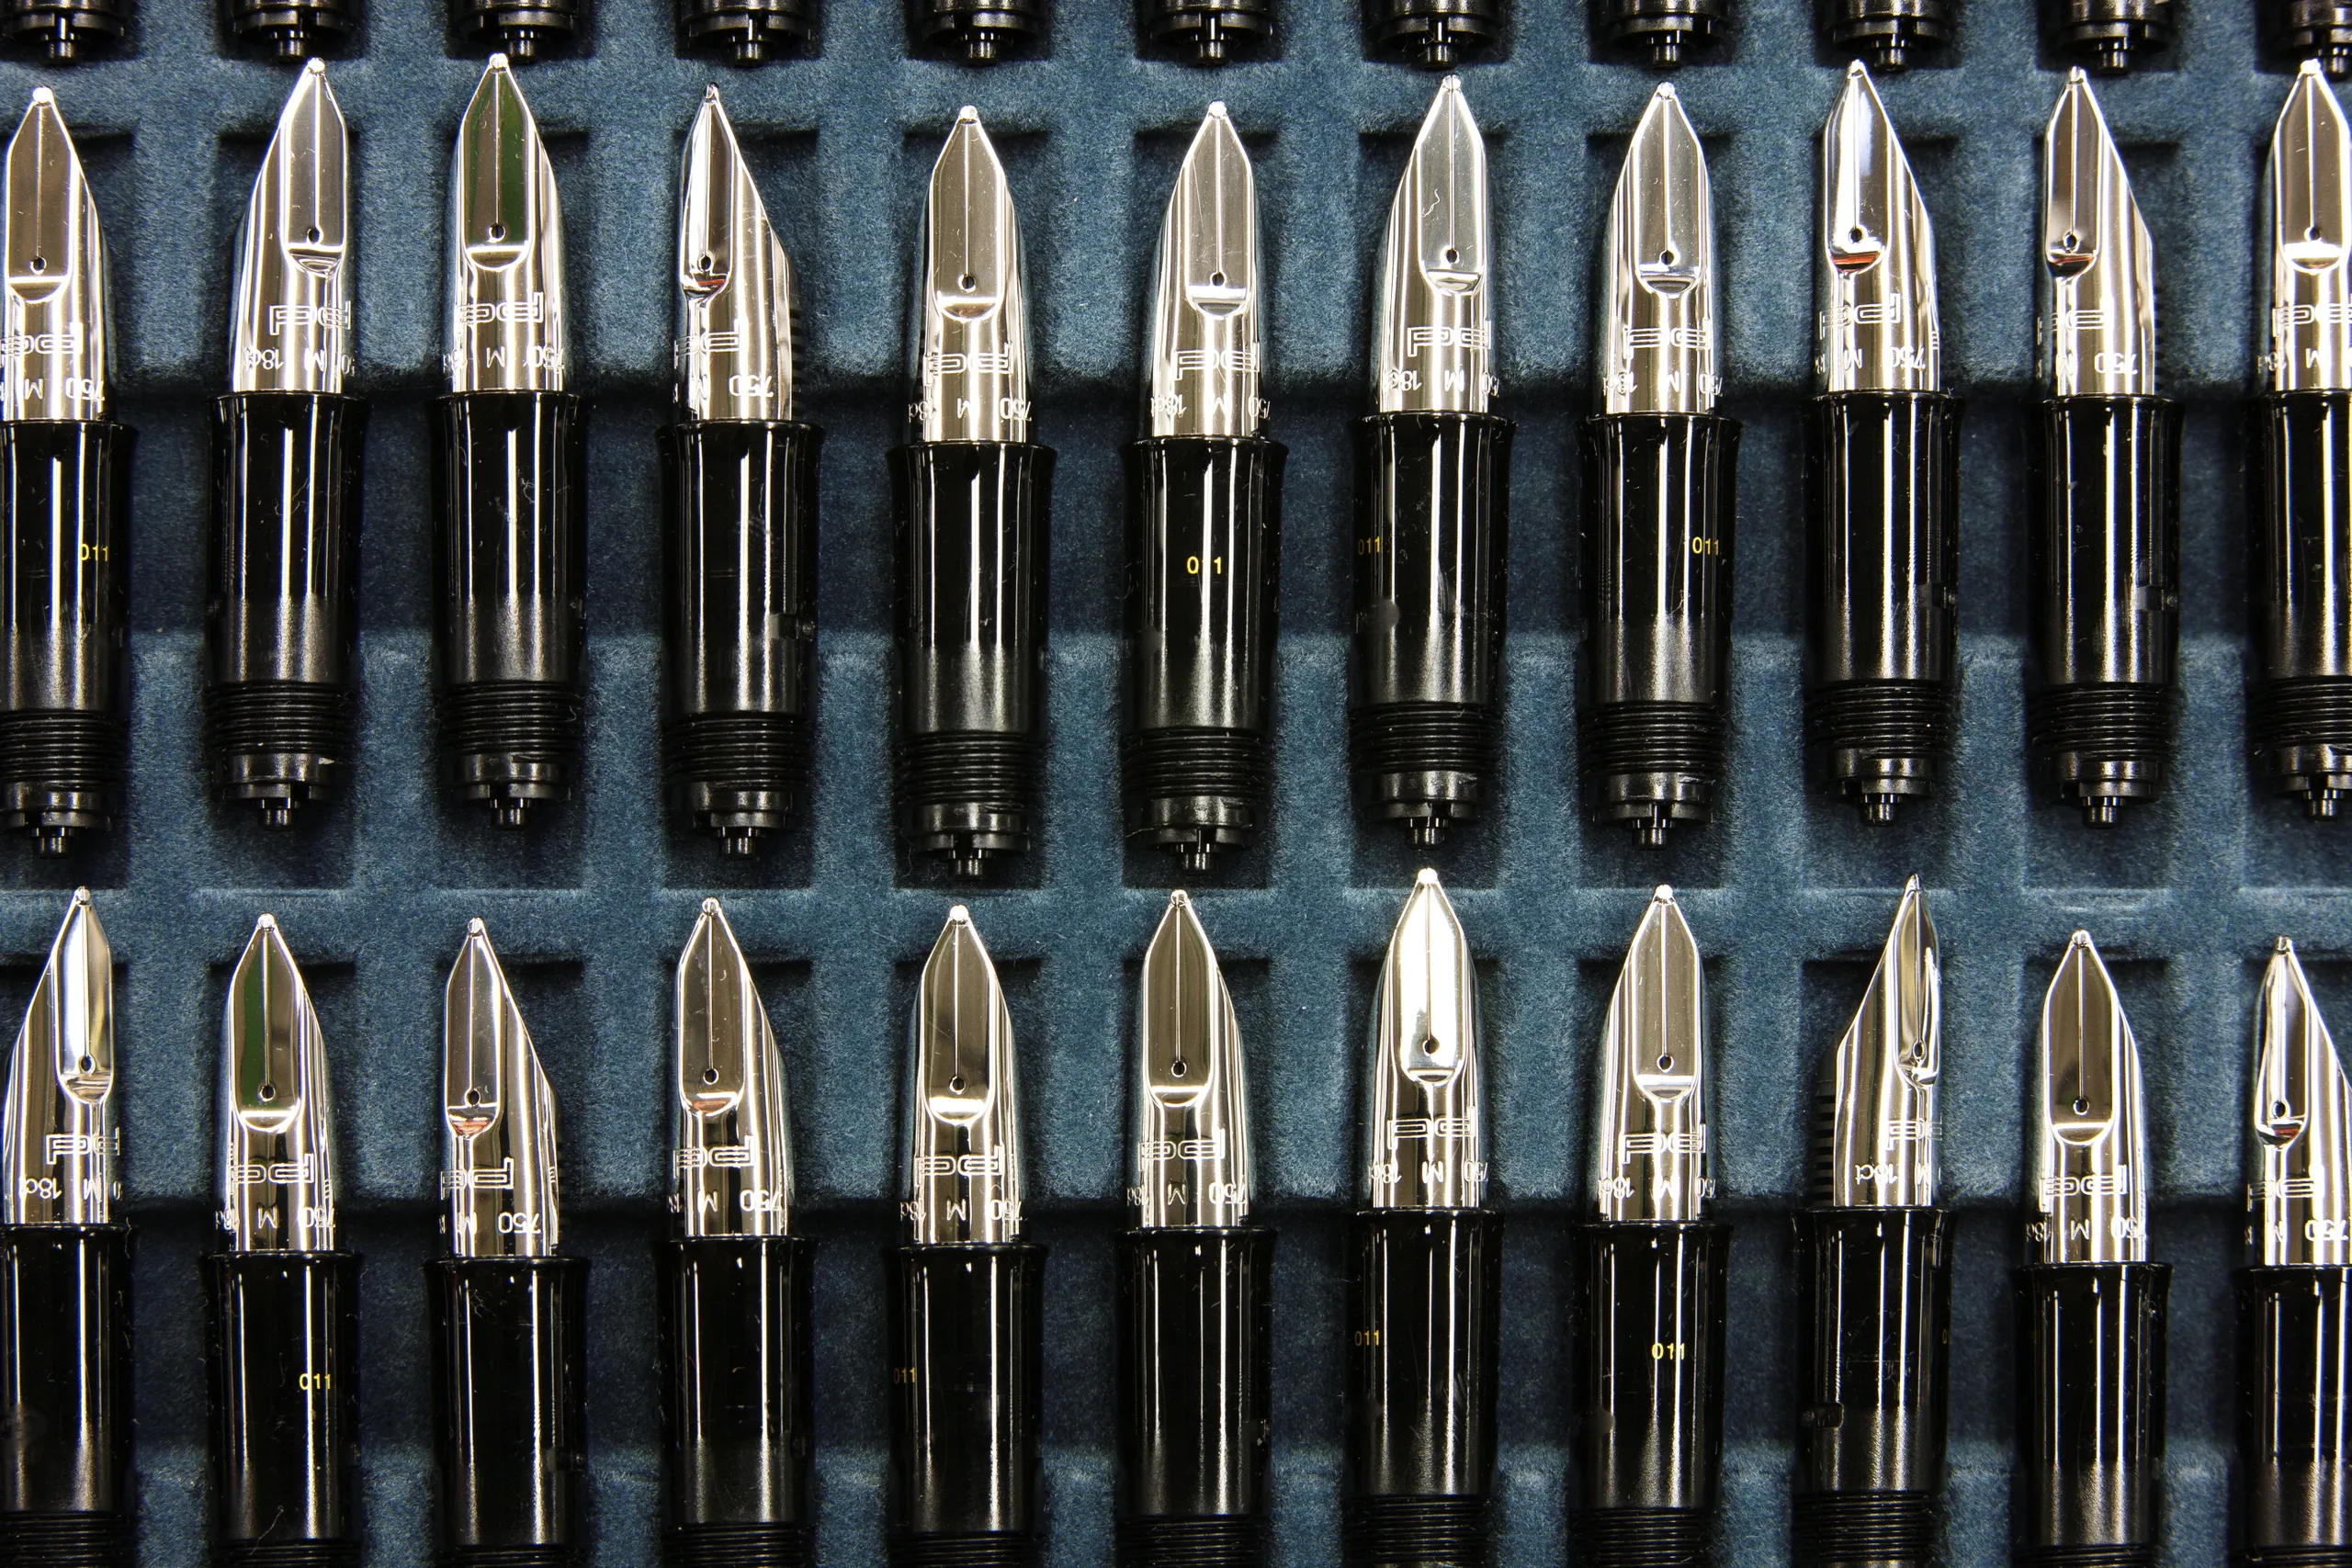 Most Expensive Fountain Pens